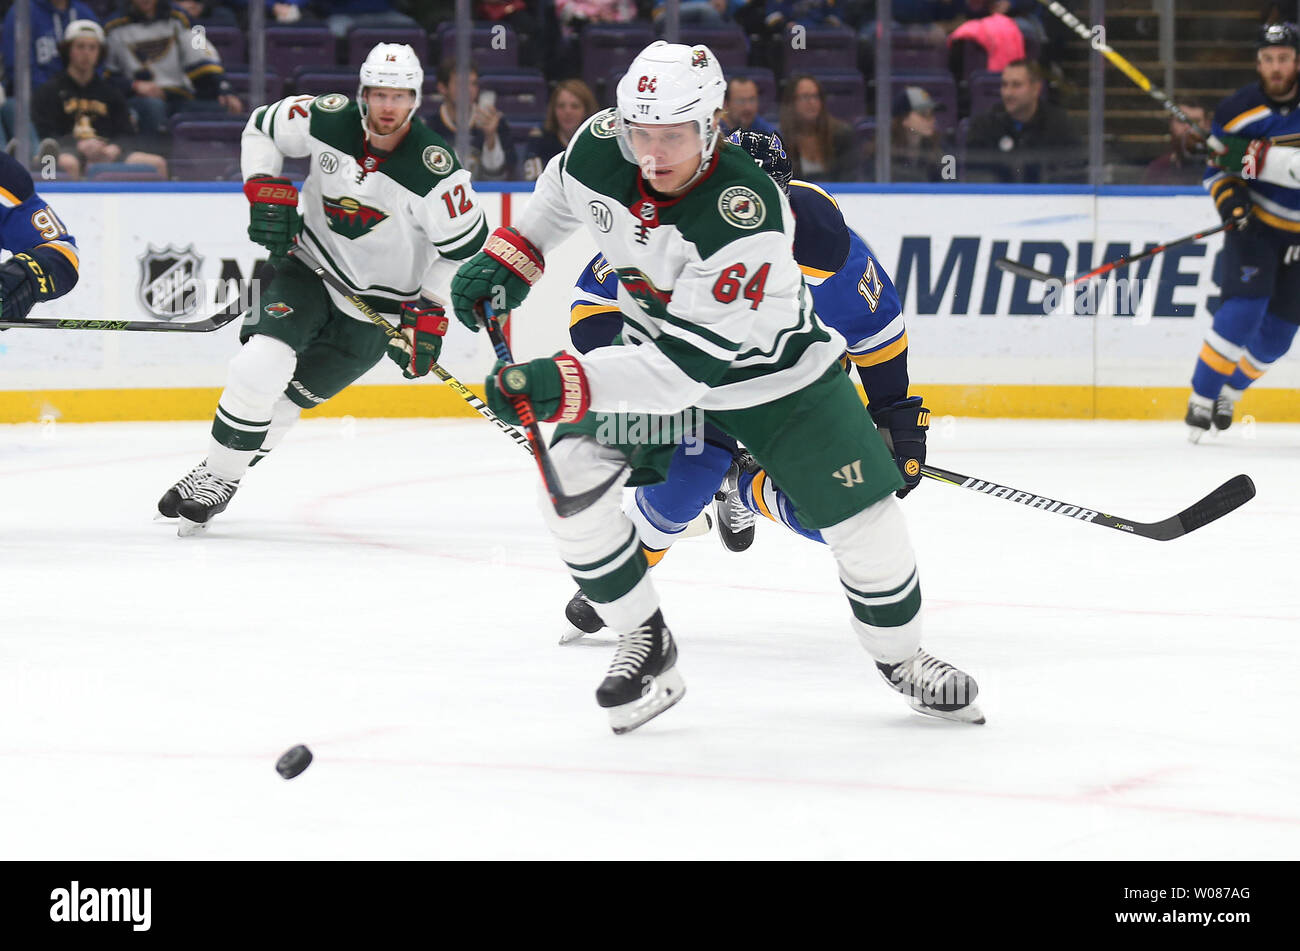 Minnesota Wild: Mikael Granlund excited about his playoff debut